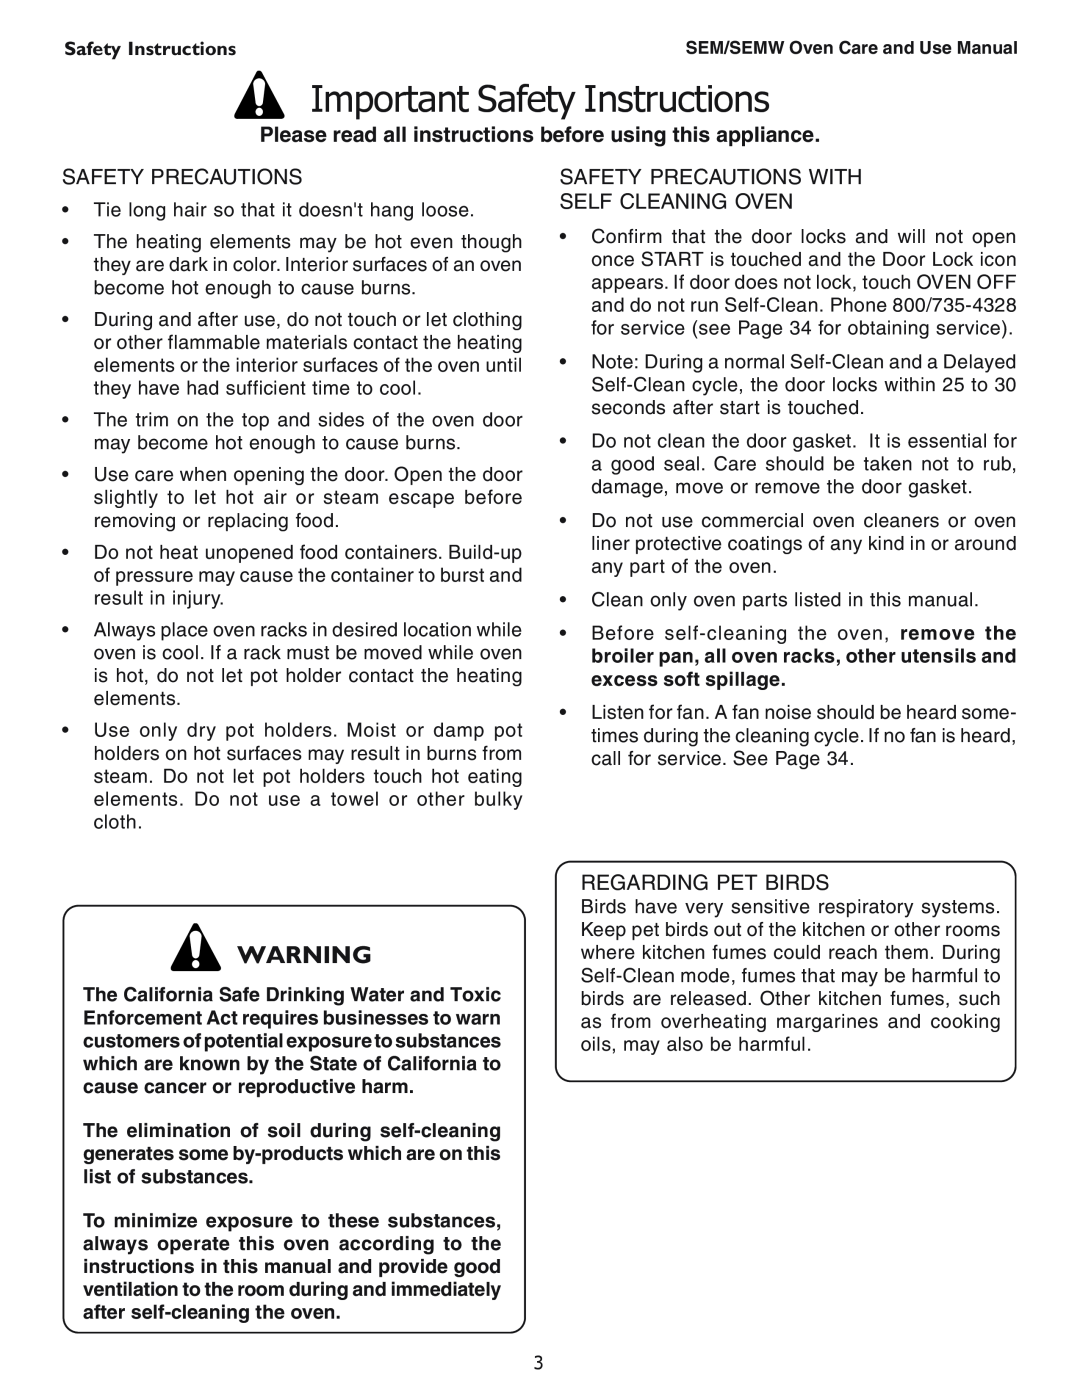 Thermador SEMW272 manual Important Safety Instructions, Safety Precautions With Self Cleaning Oven, Regarding Pet Birds 